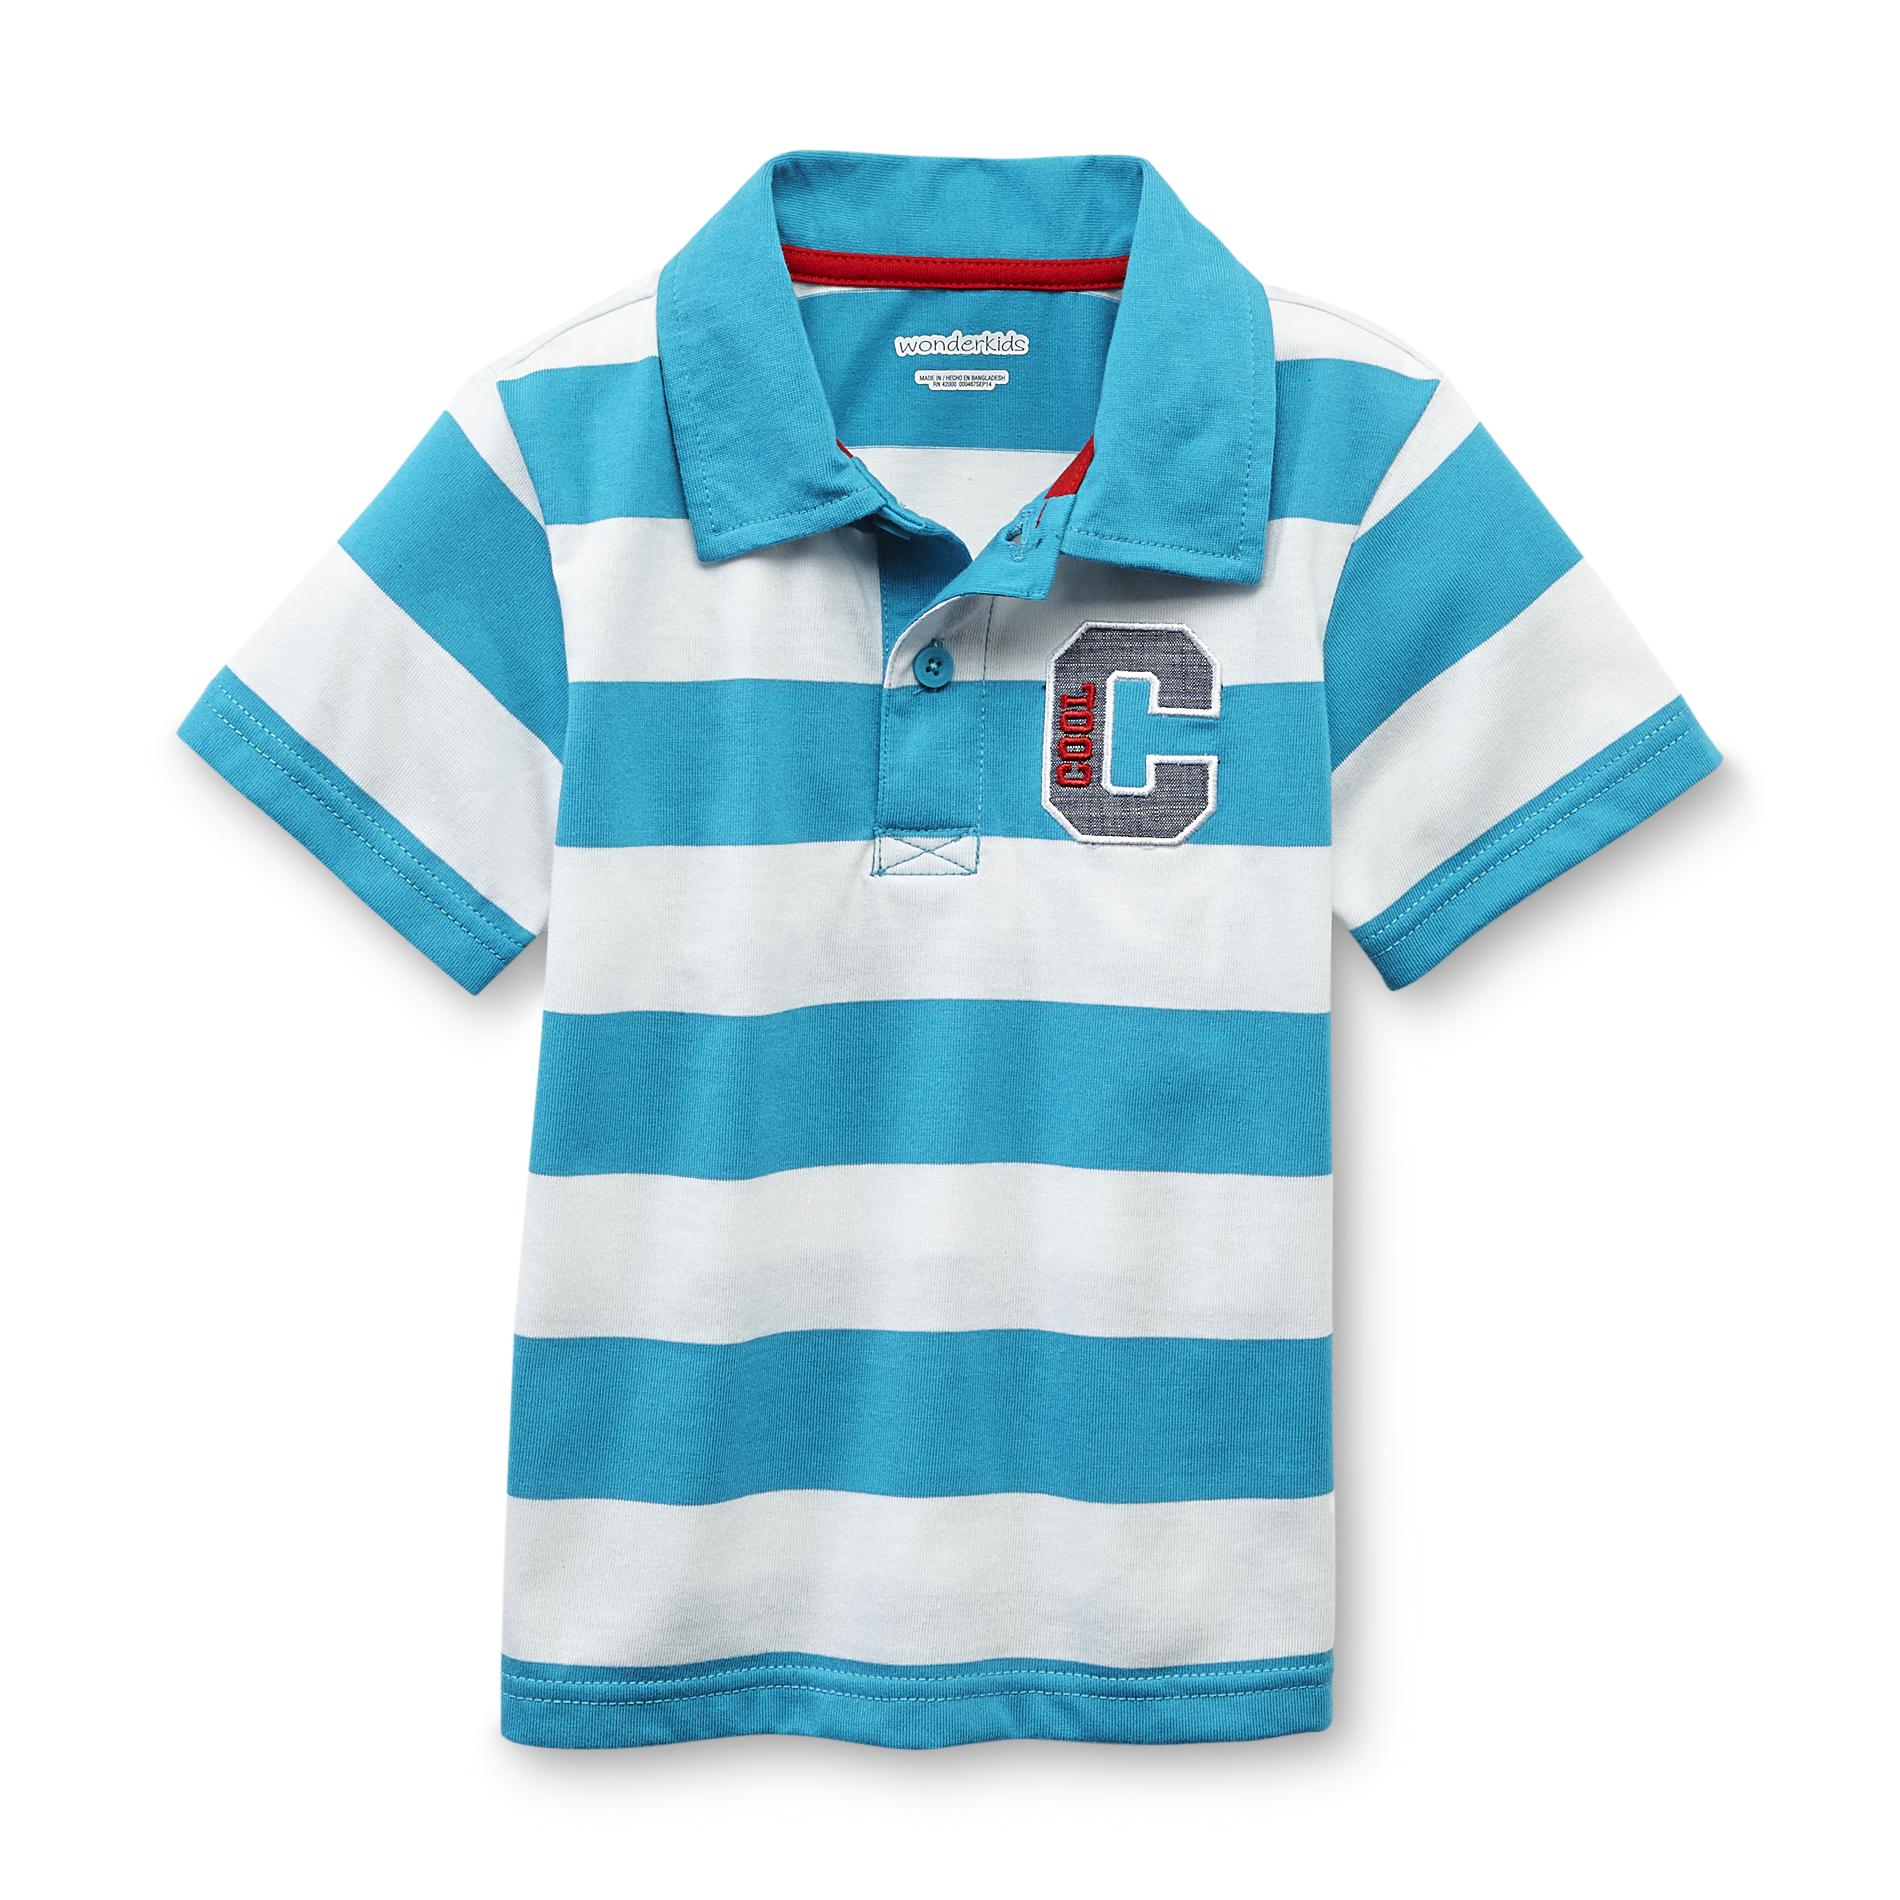 WonderKids Infant & Toddler Boy's Striped Polo Shirt - Cool